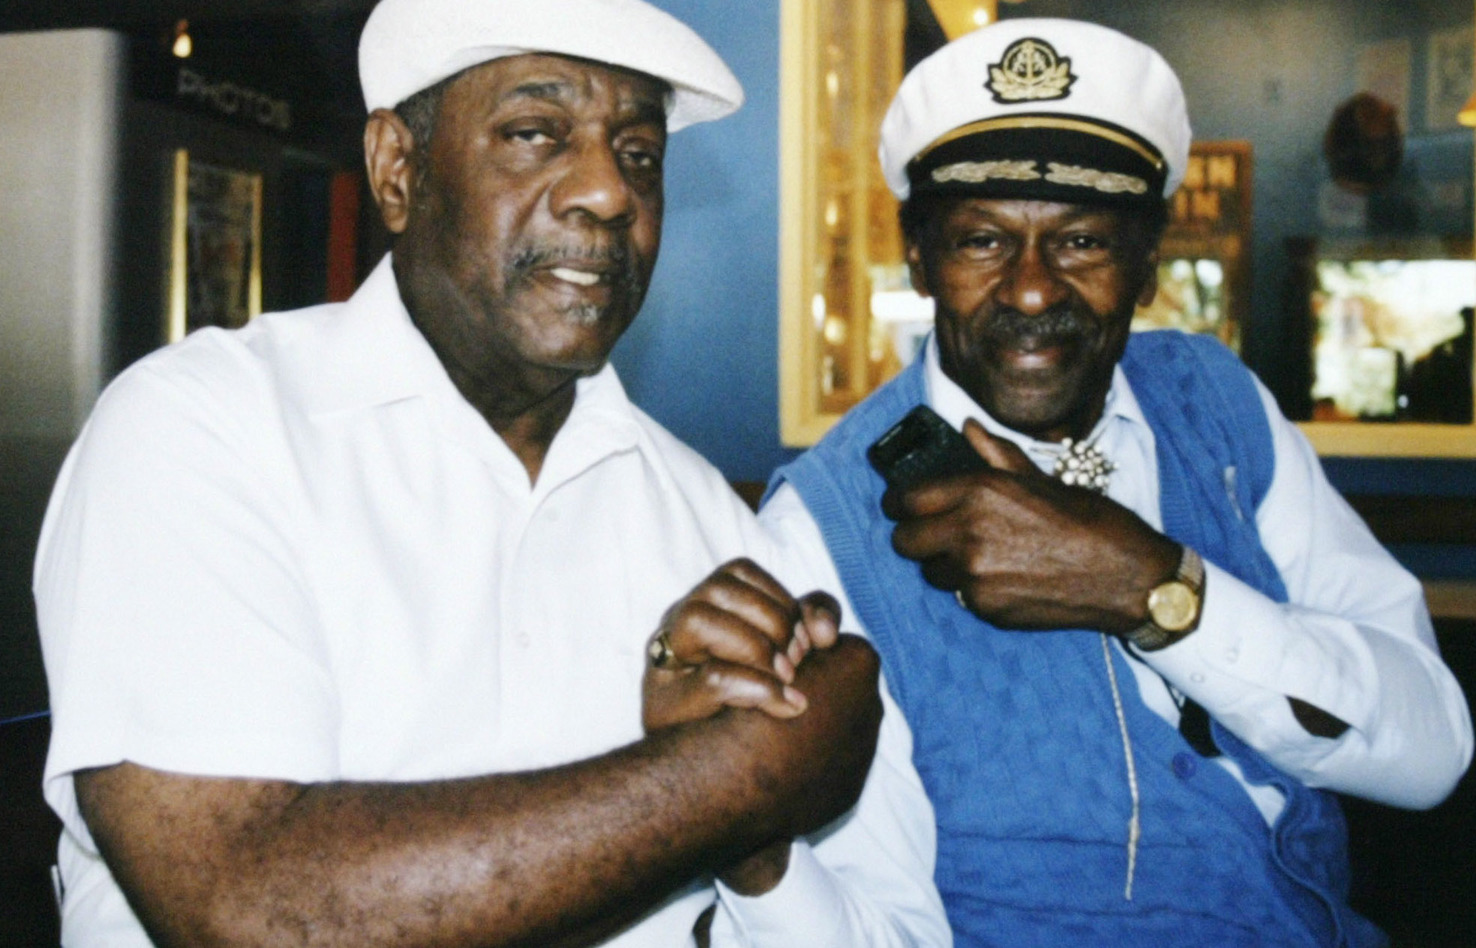 Johnnie Johnson (left) and Chuck Berry pose in this undated AP photo.